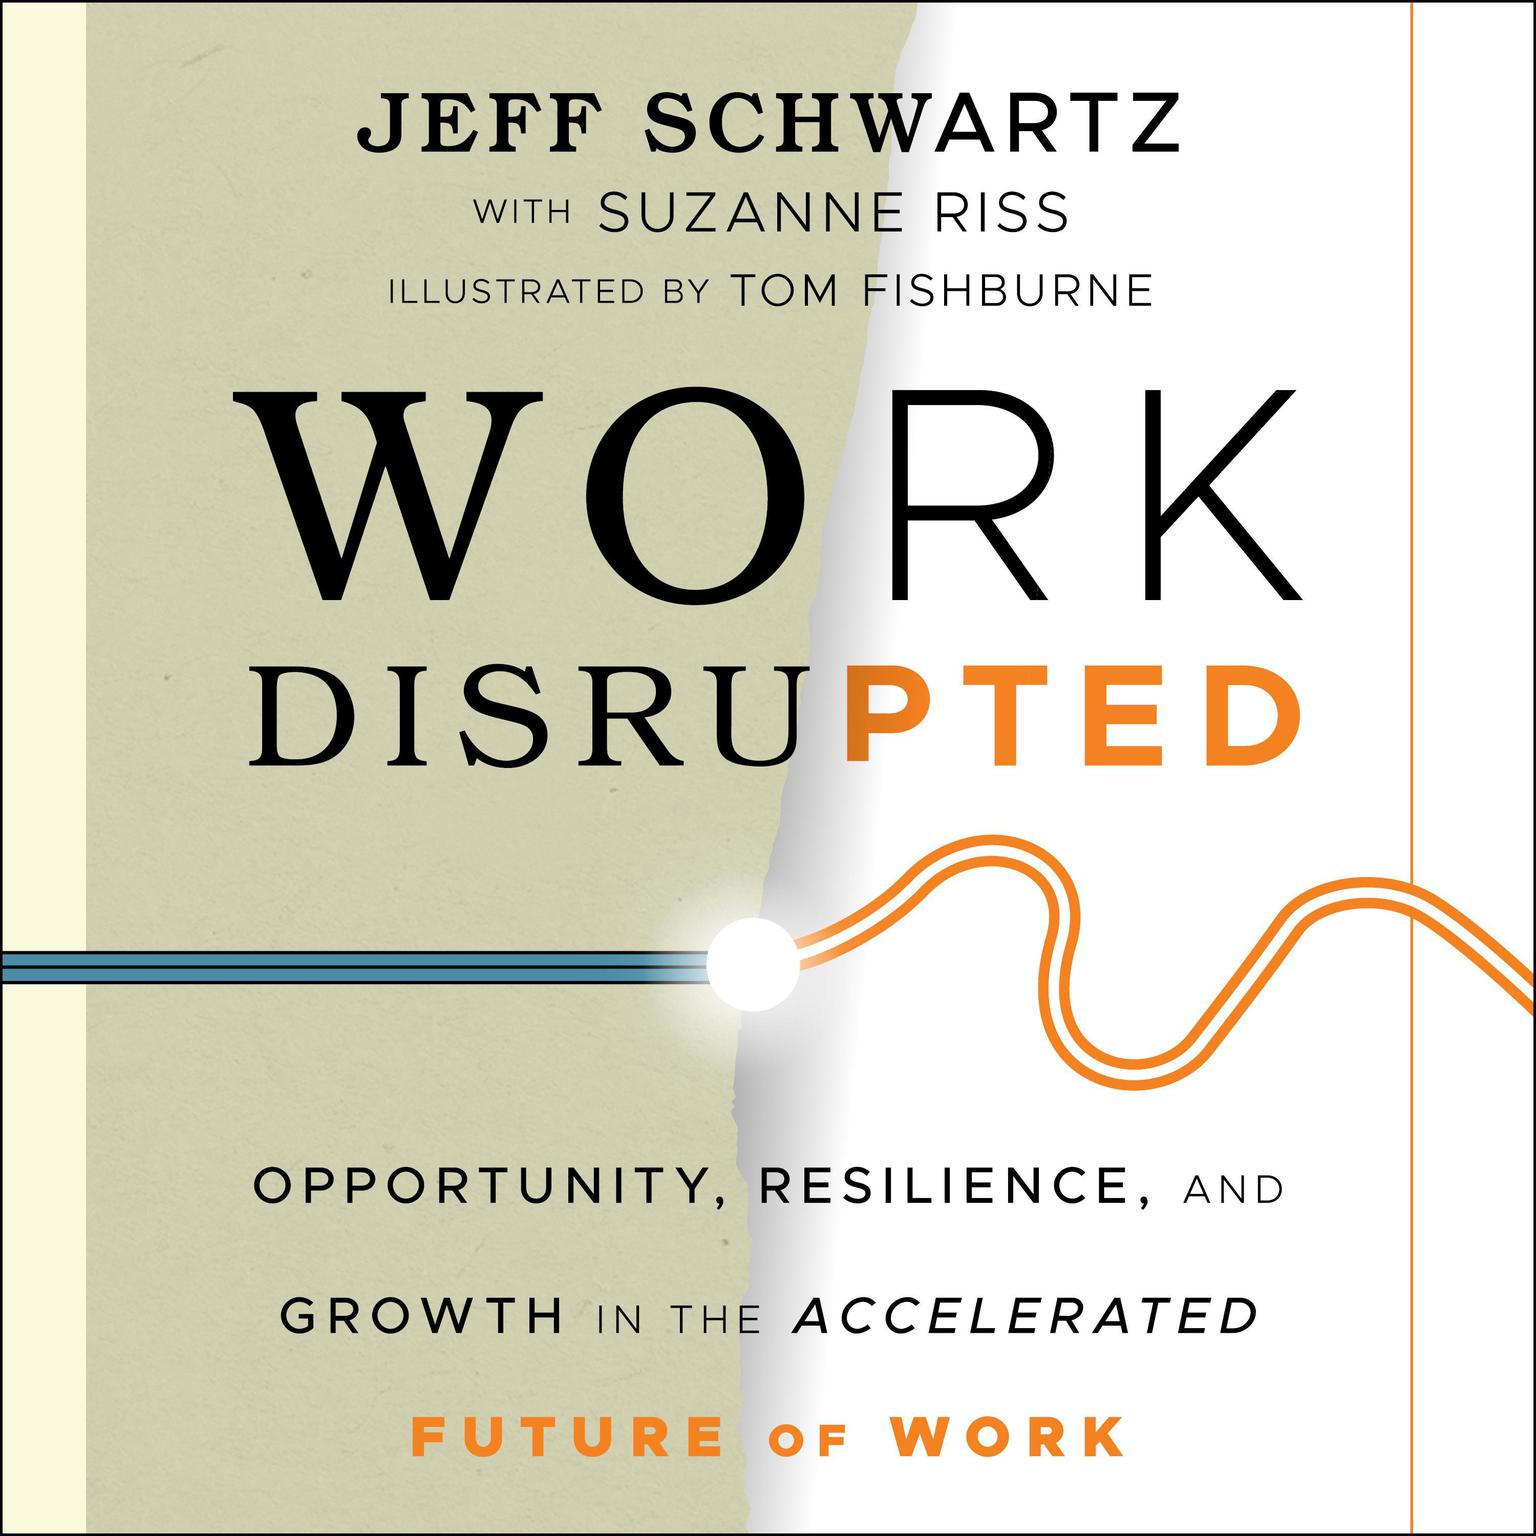 Work Disrupted: Opportunity, Resilience, and Growth in the Accelerated Future of Work Audiobook, by Jeffrey M. Schwartz, M.D.